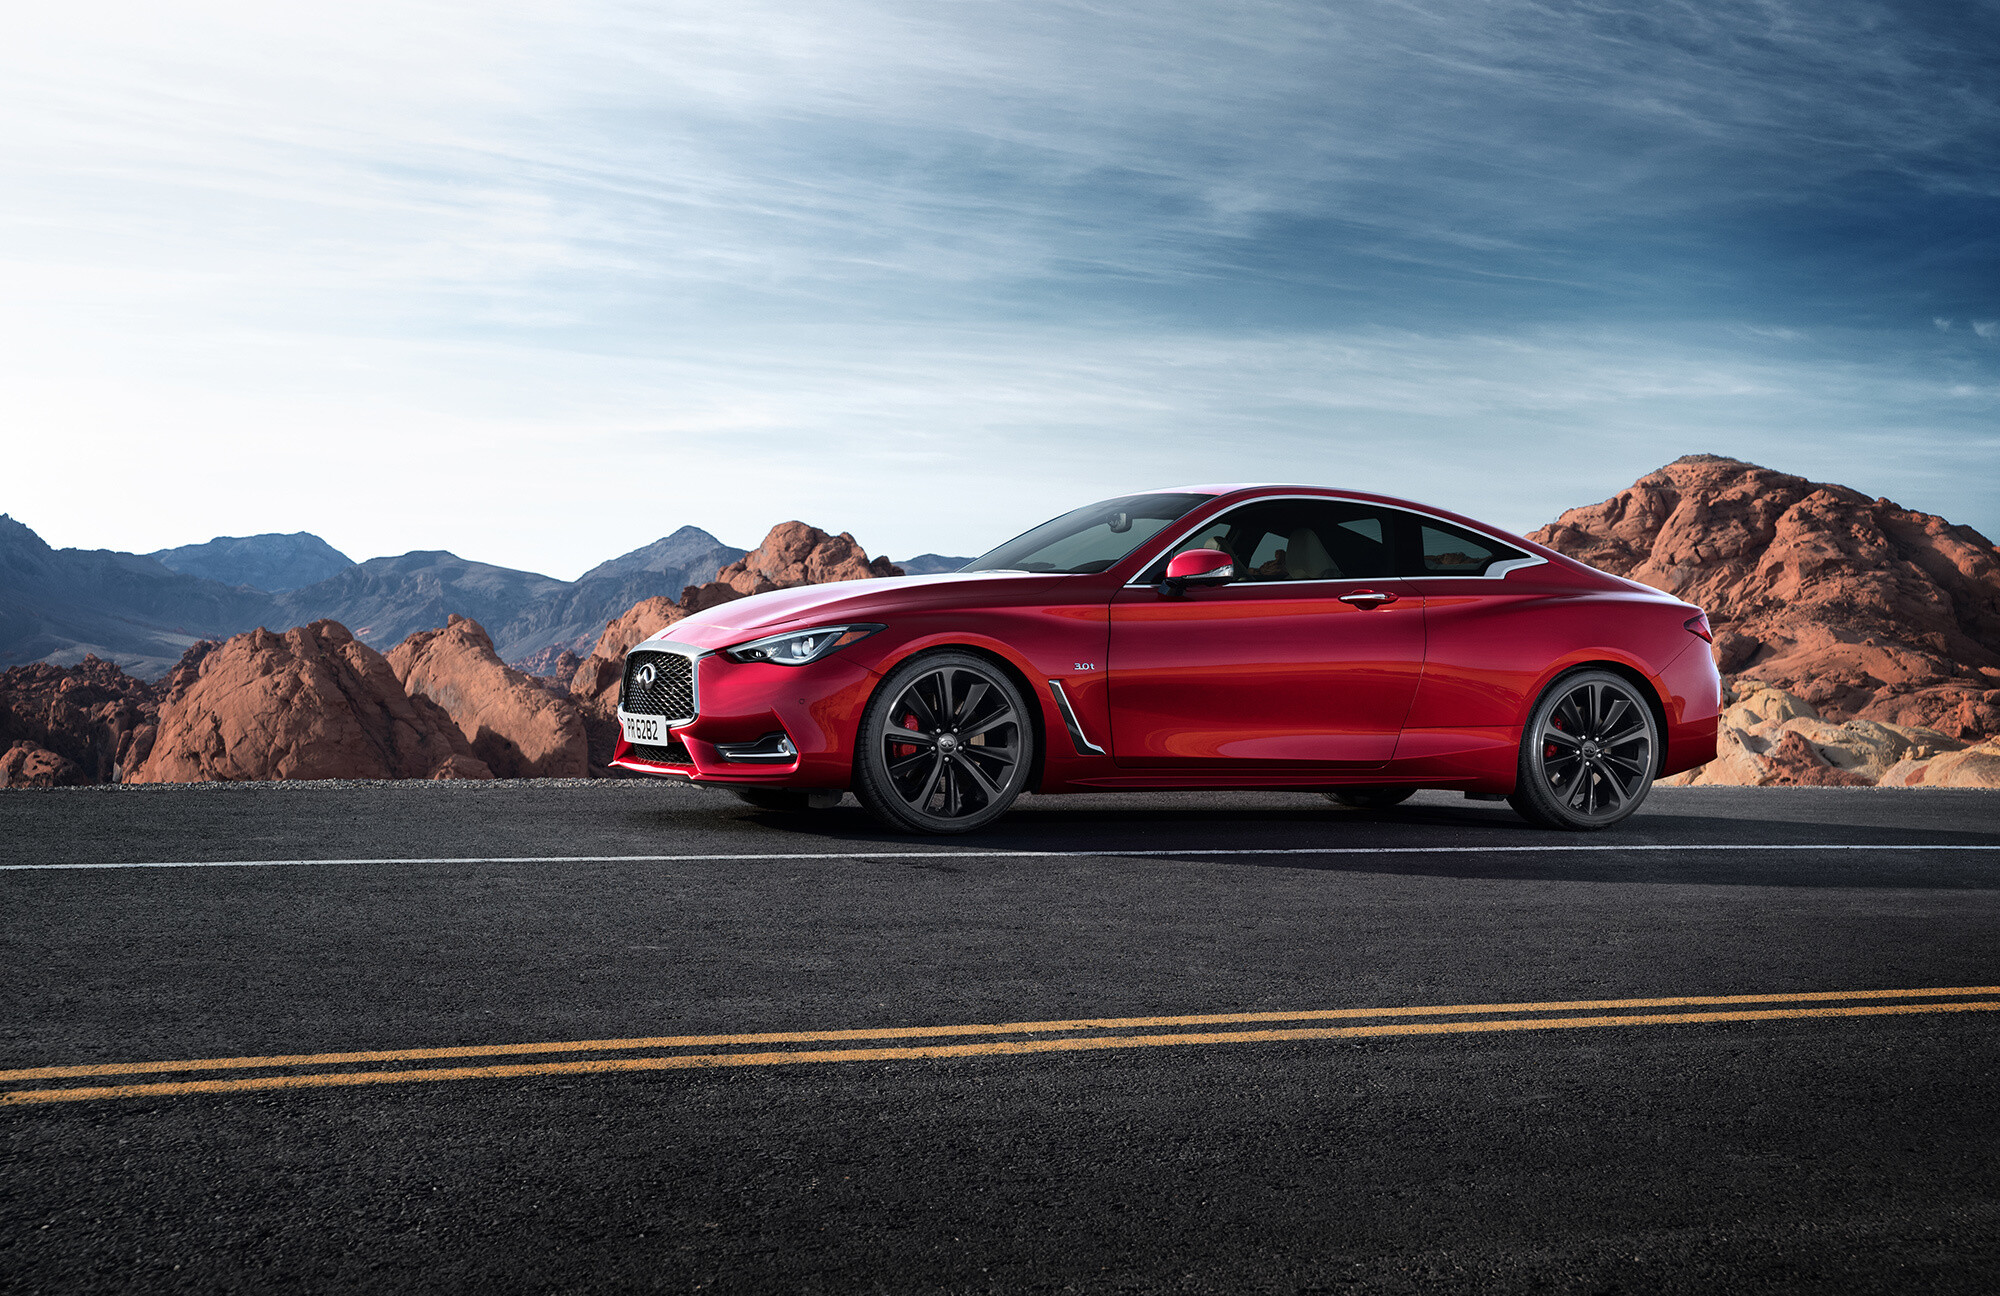 Infiniti: Q60, A 2-door sport luxury coupe manufactured by the Japanese automaker. 2000x1300 HD Wallpaper.